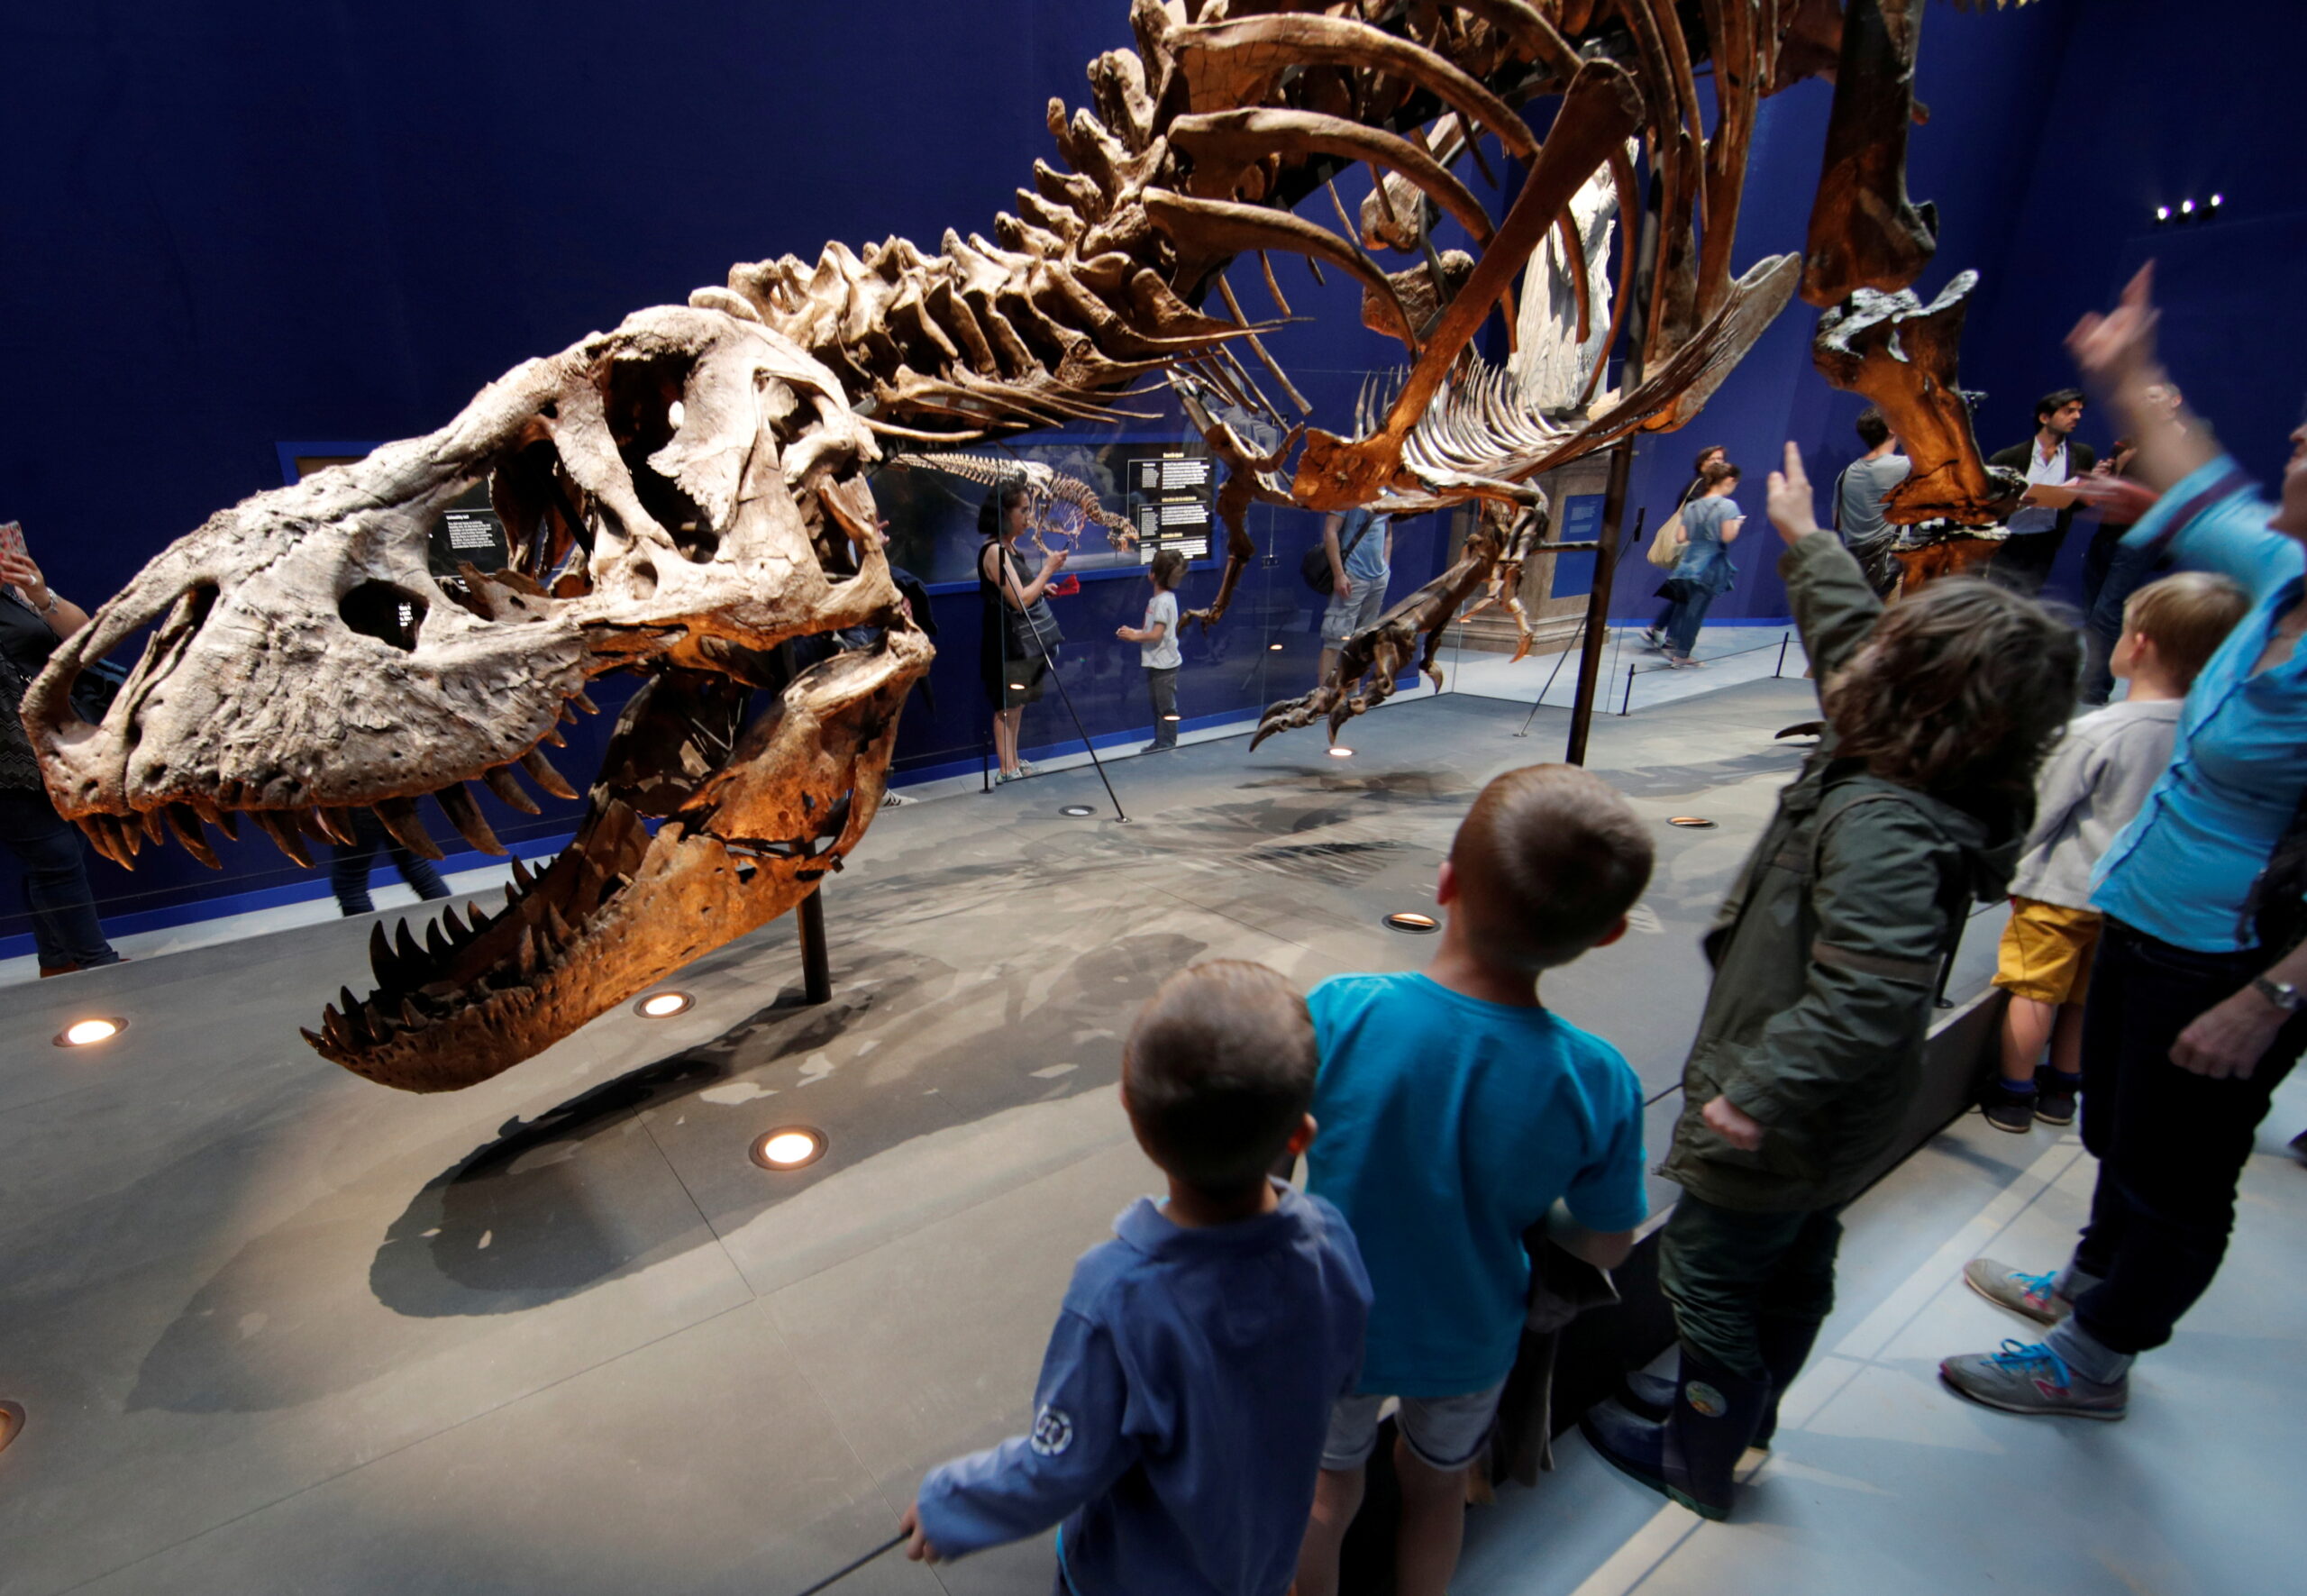 Keeping up with T. Rex was easy, Dutch researchers say